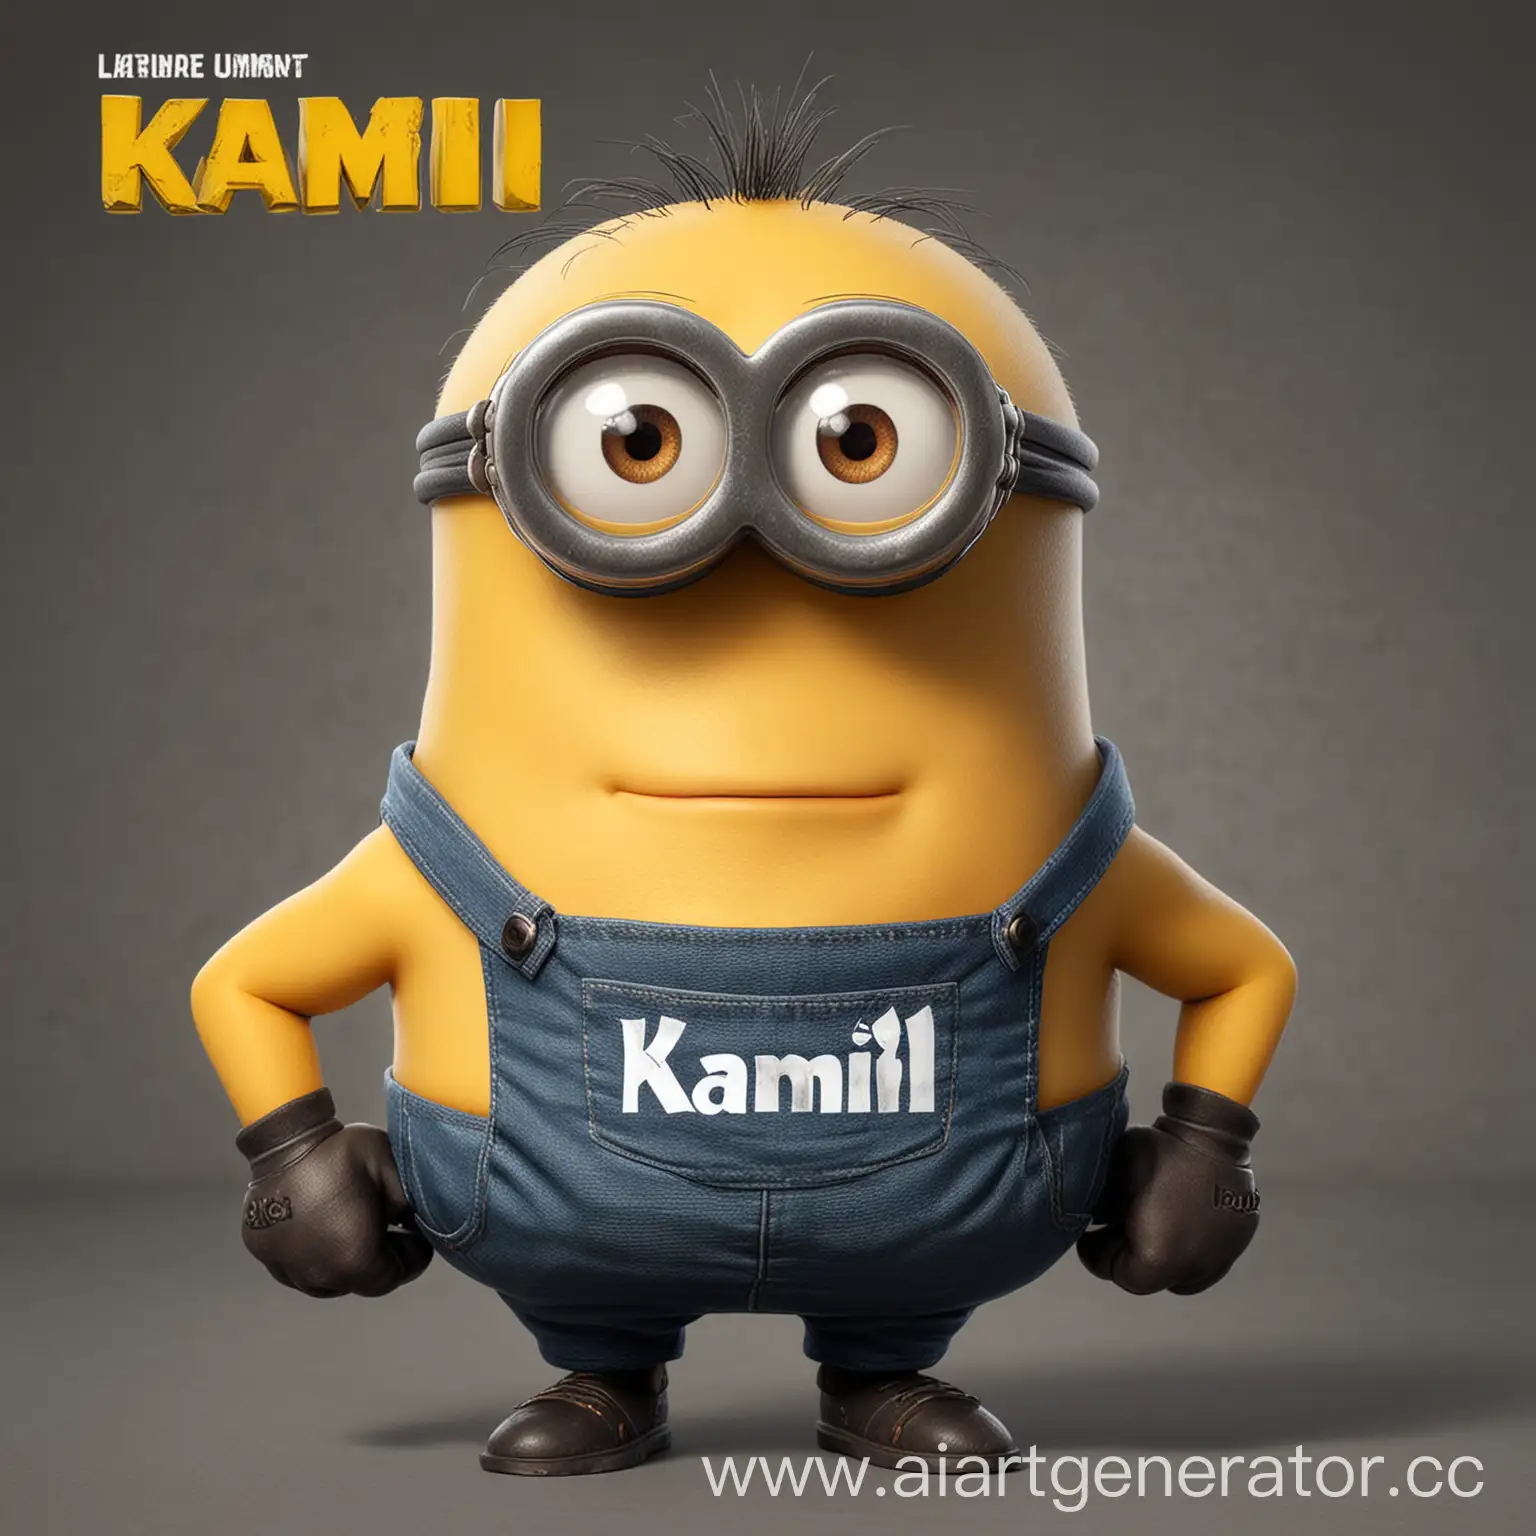 A muscular minion with a name that has a T-shirt with the inscription "kamil" on it